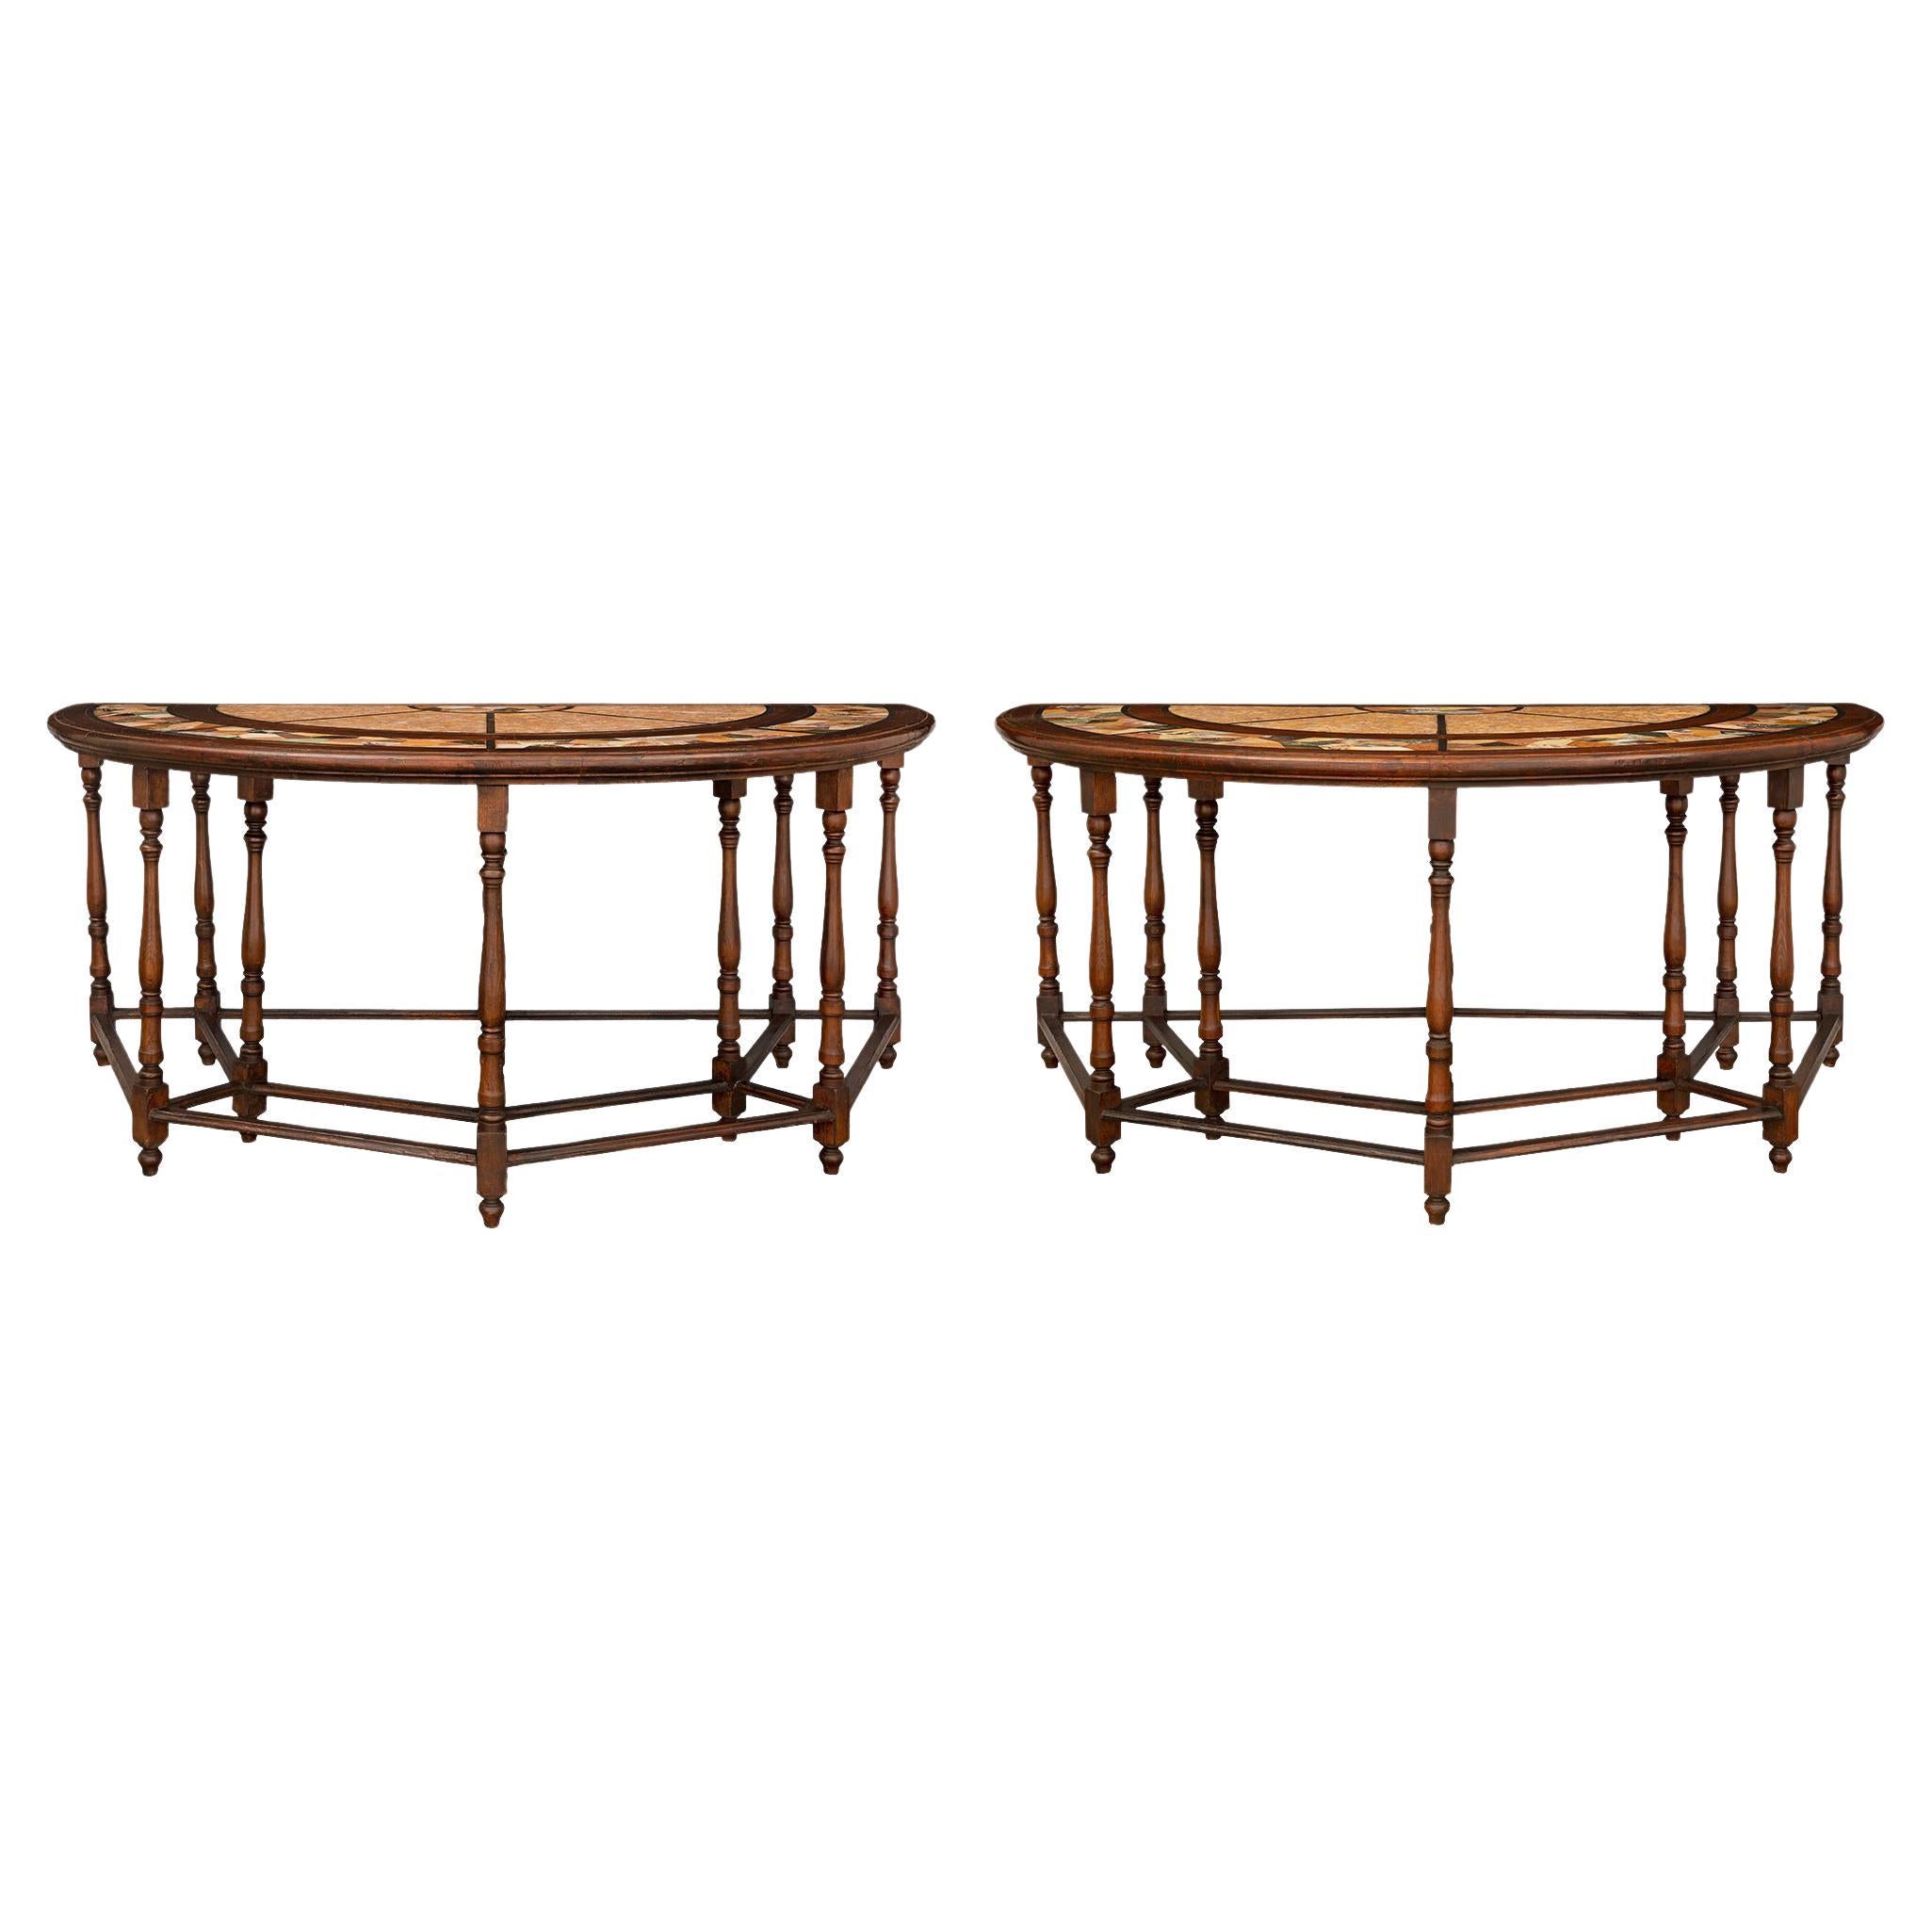 Pair of Italian 19th Century Walnut and Pietra Dura Consoles/Center Tables For Sale